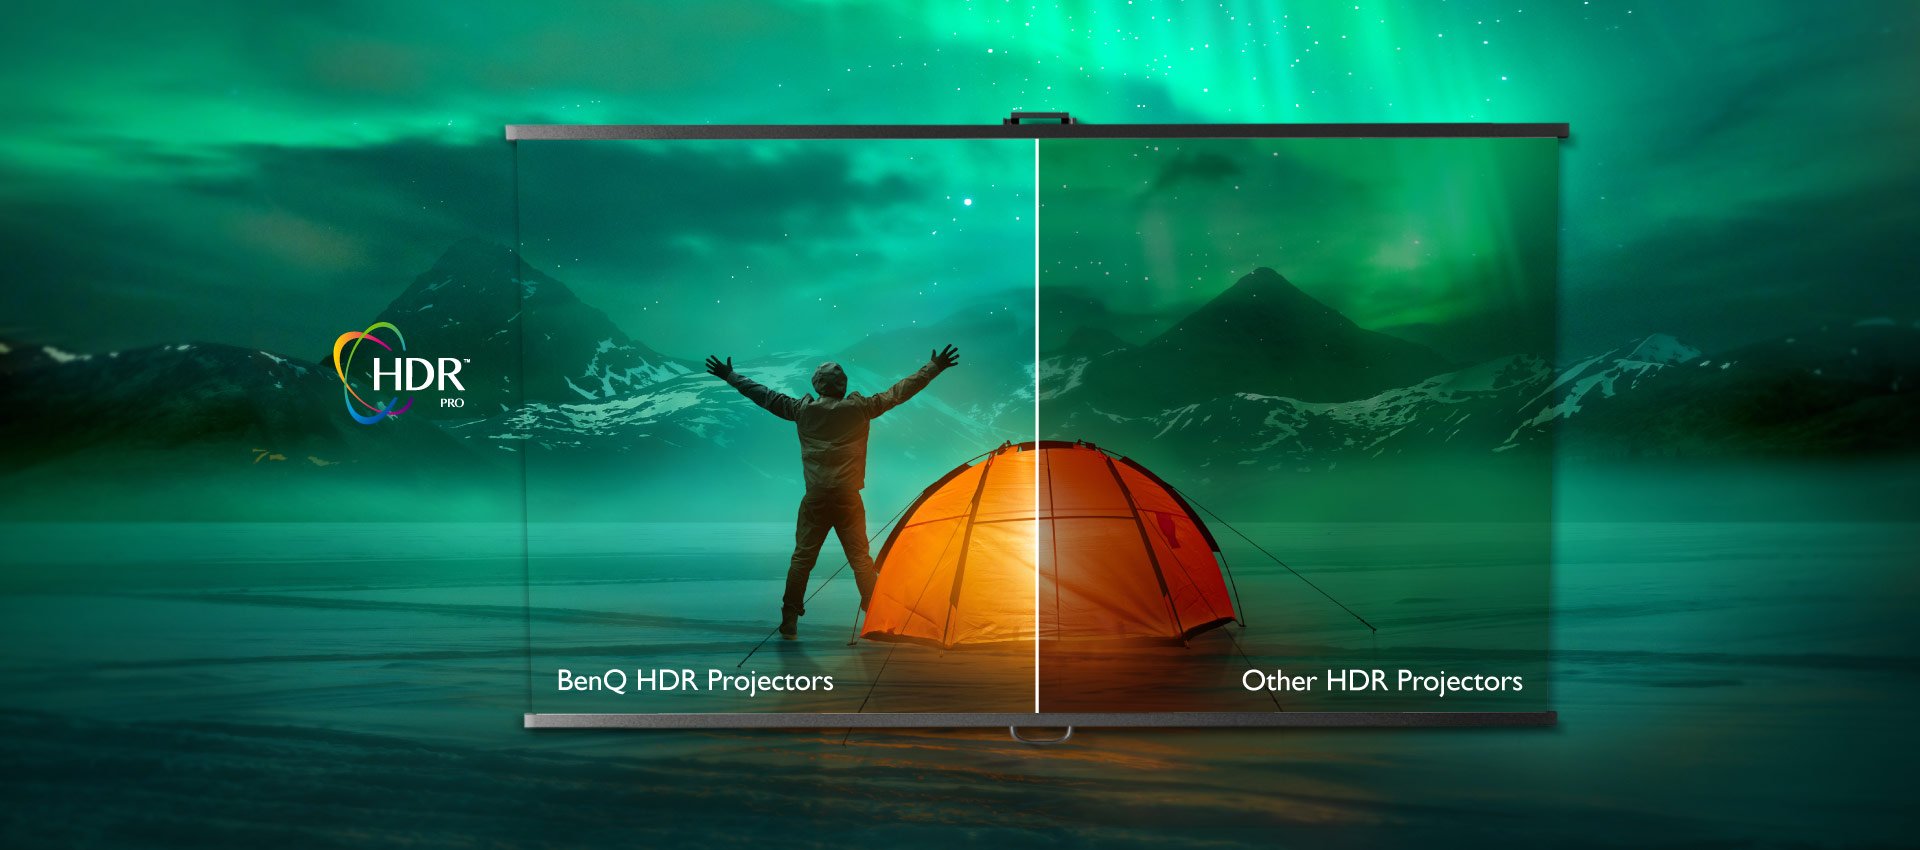 HDR-PRO offers greater brightness, contrast range, and image optimization